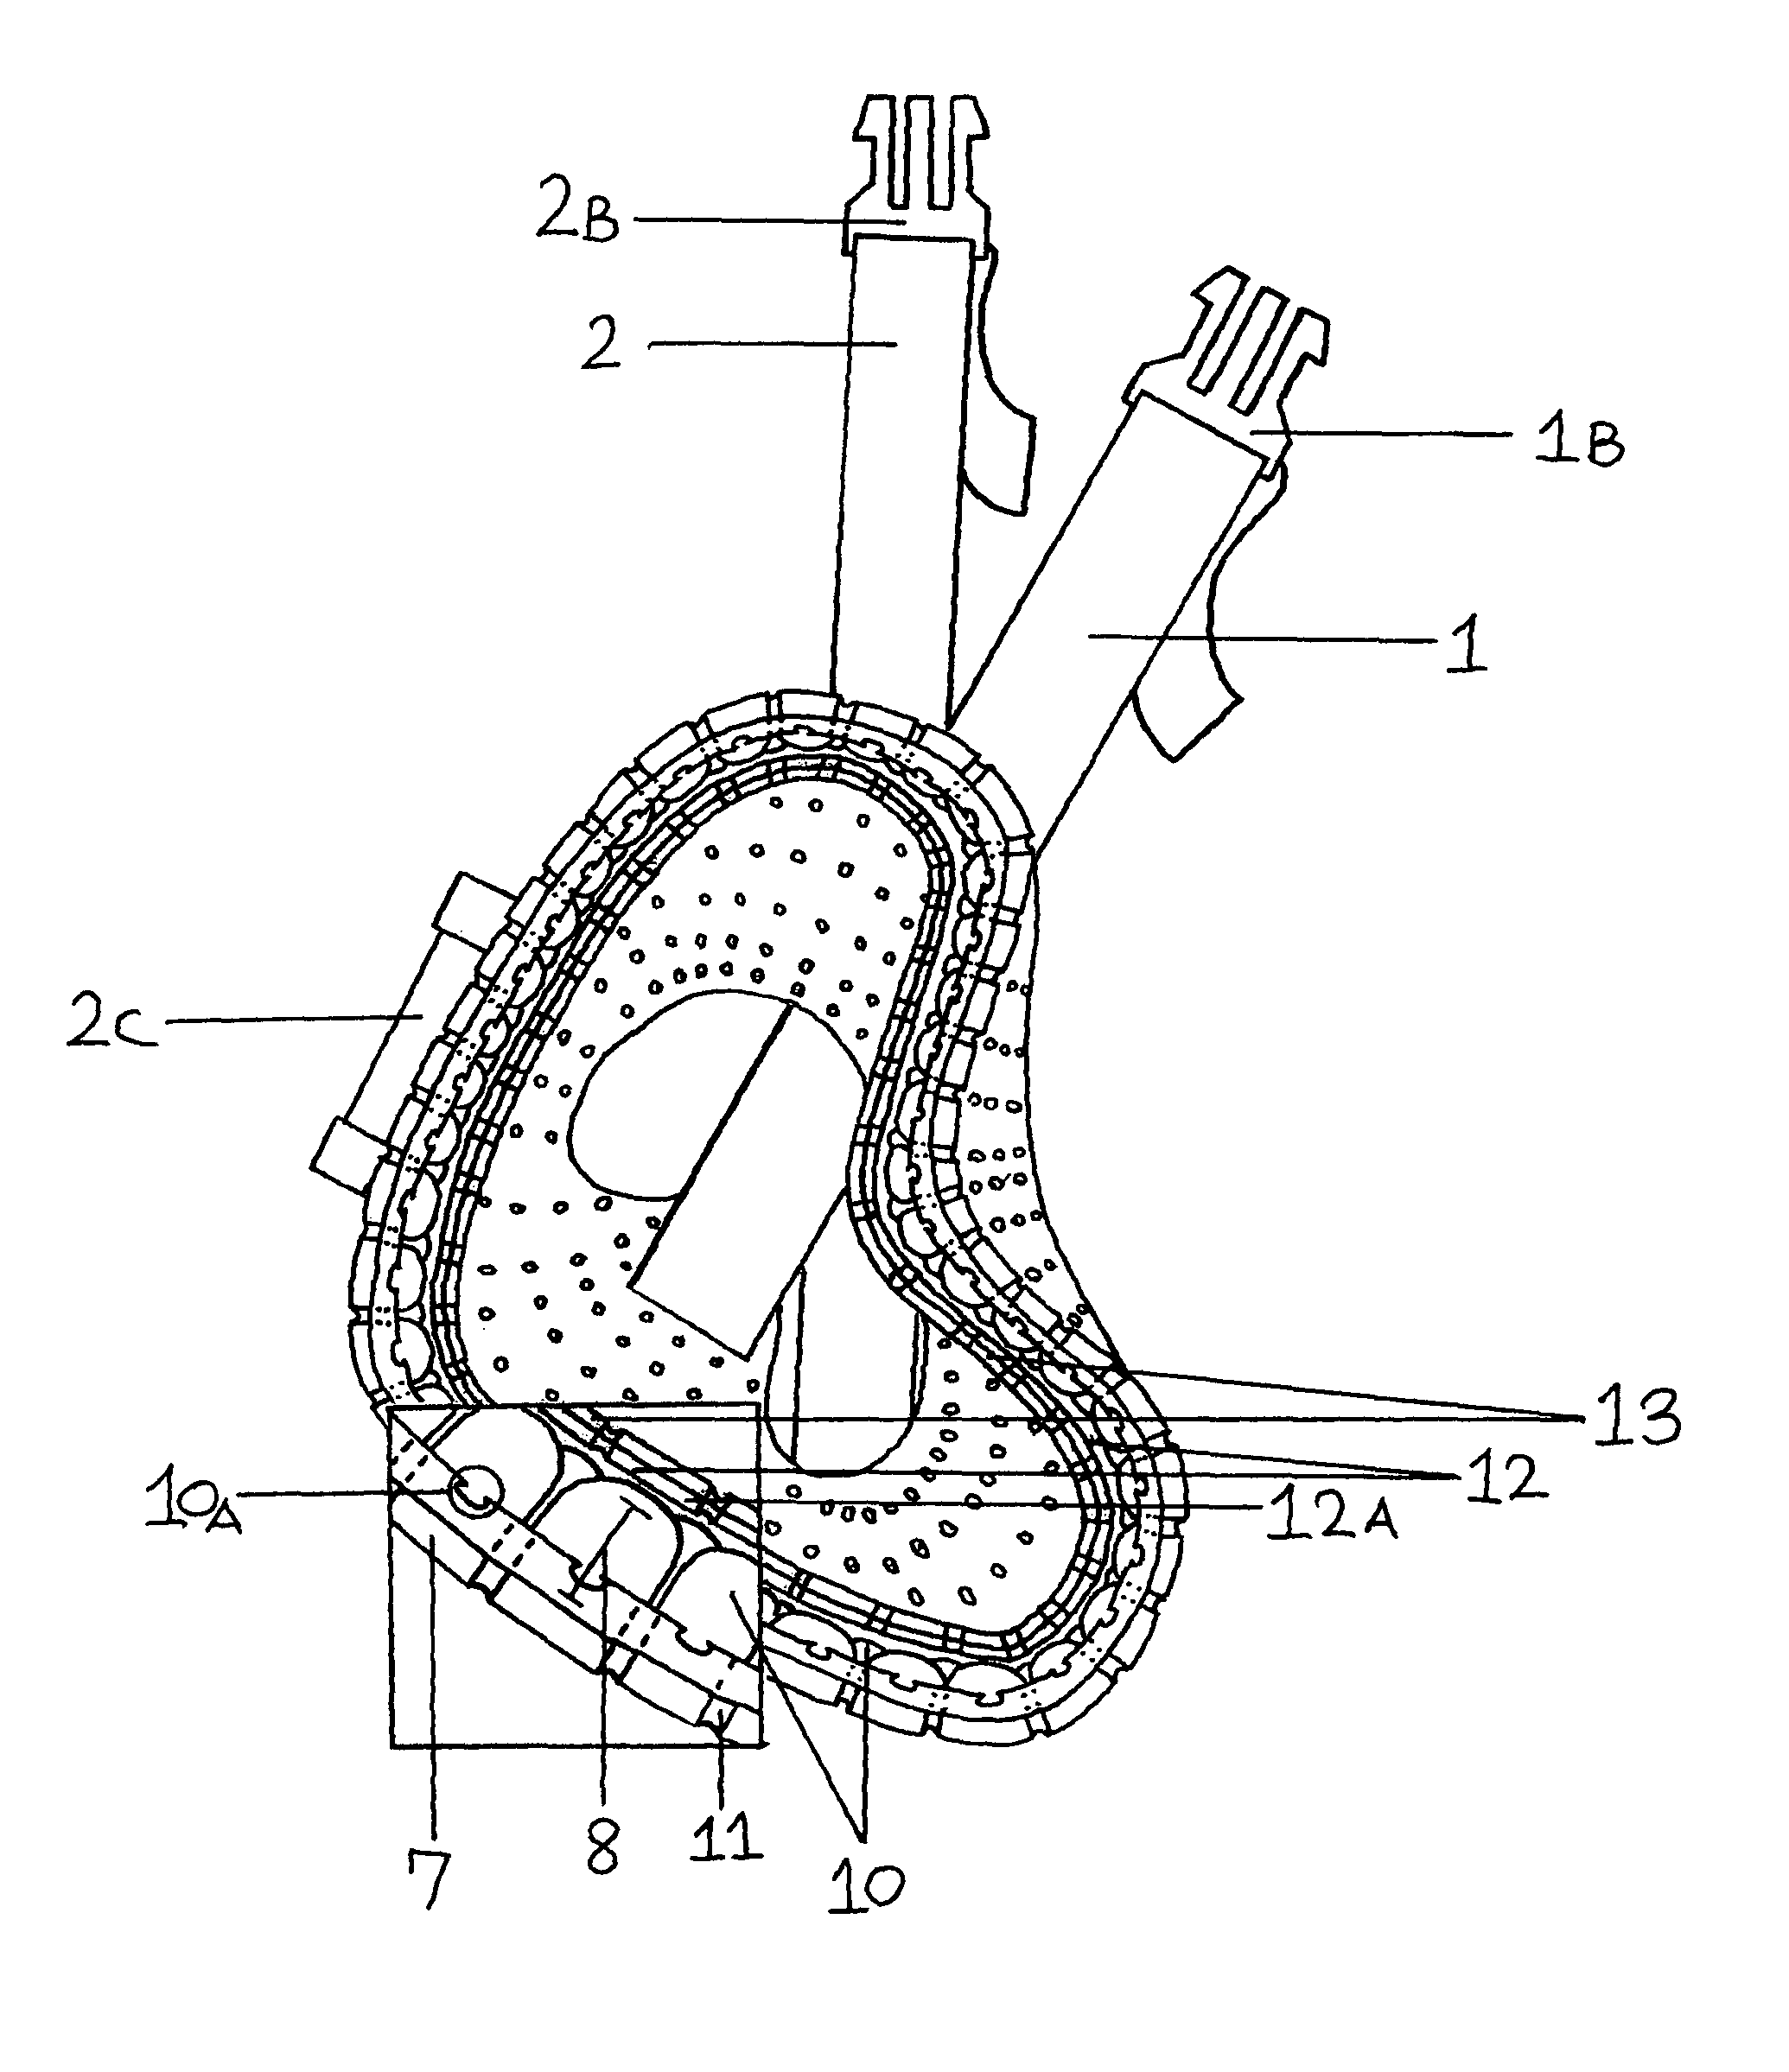 Device to treat and/or prevent shoulder subluxation